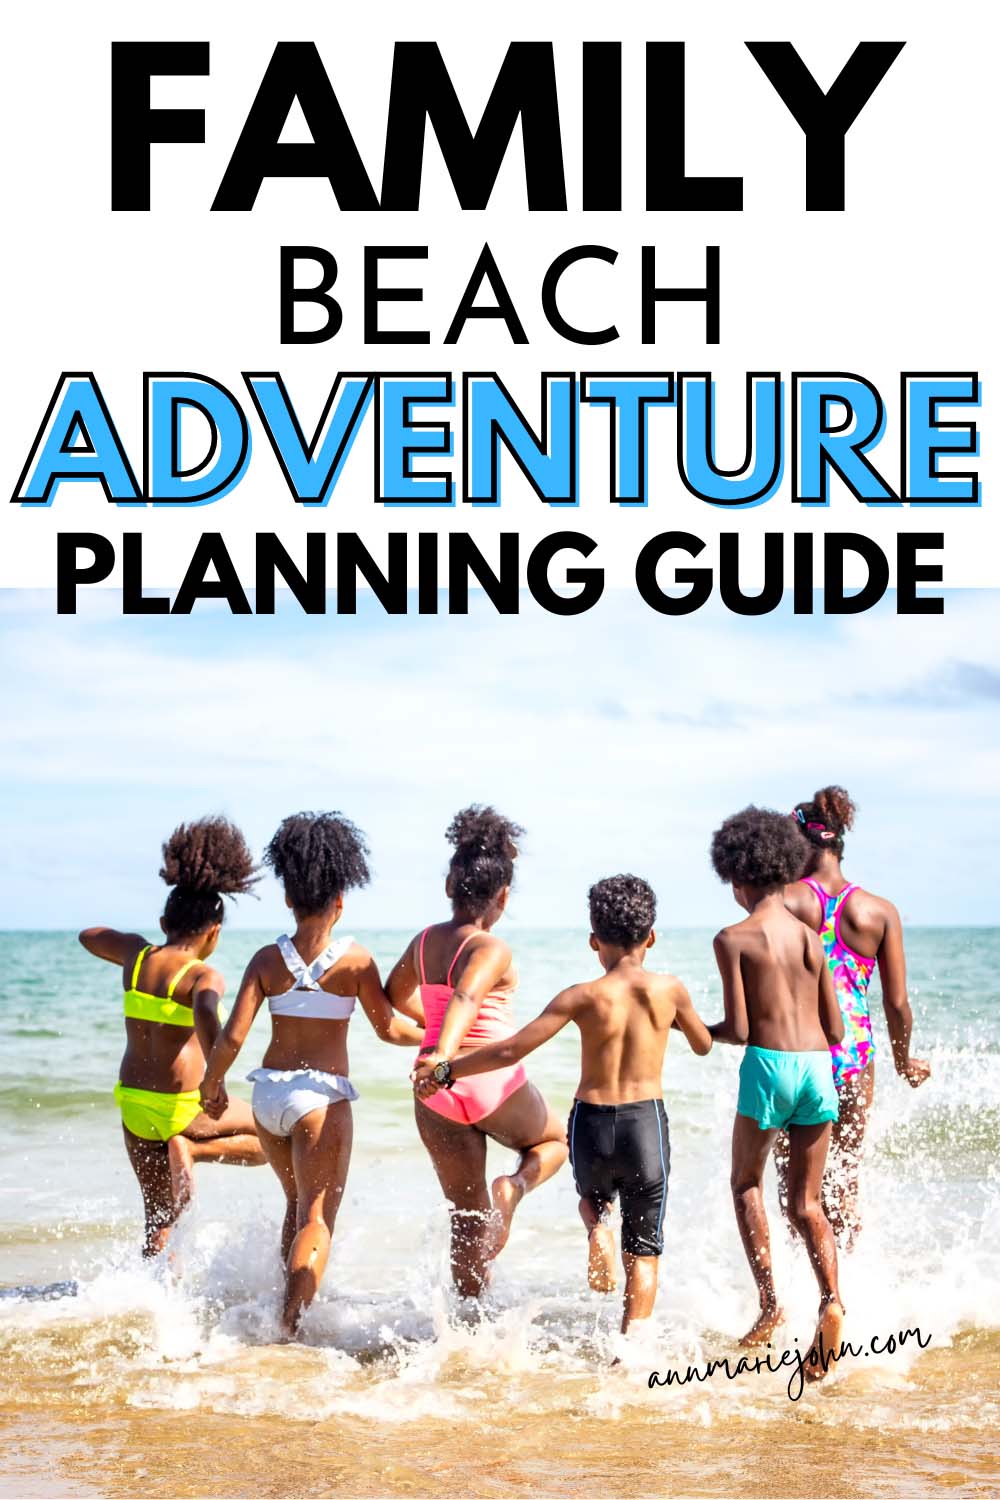 Family Beach Adventure Planning Guide